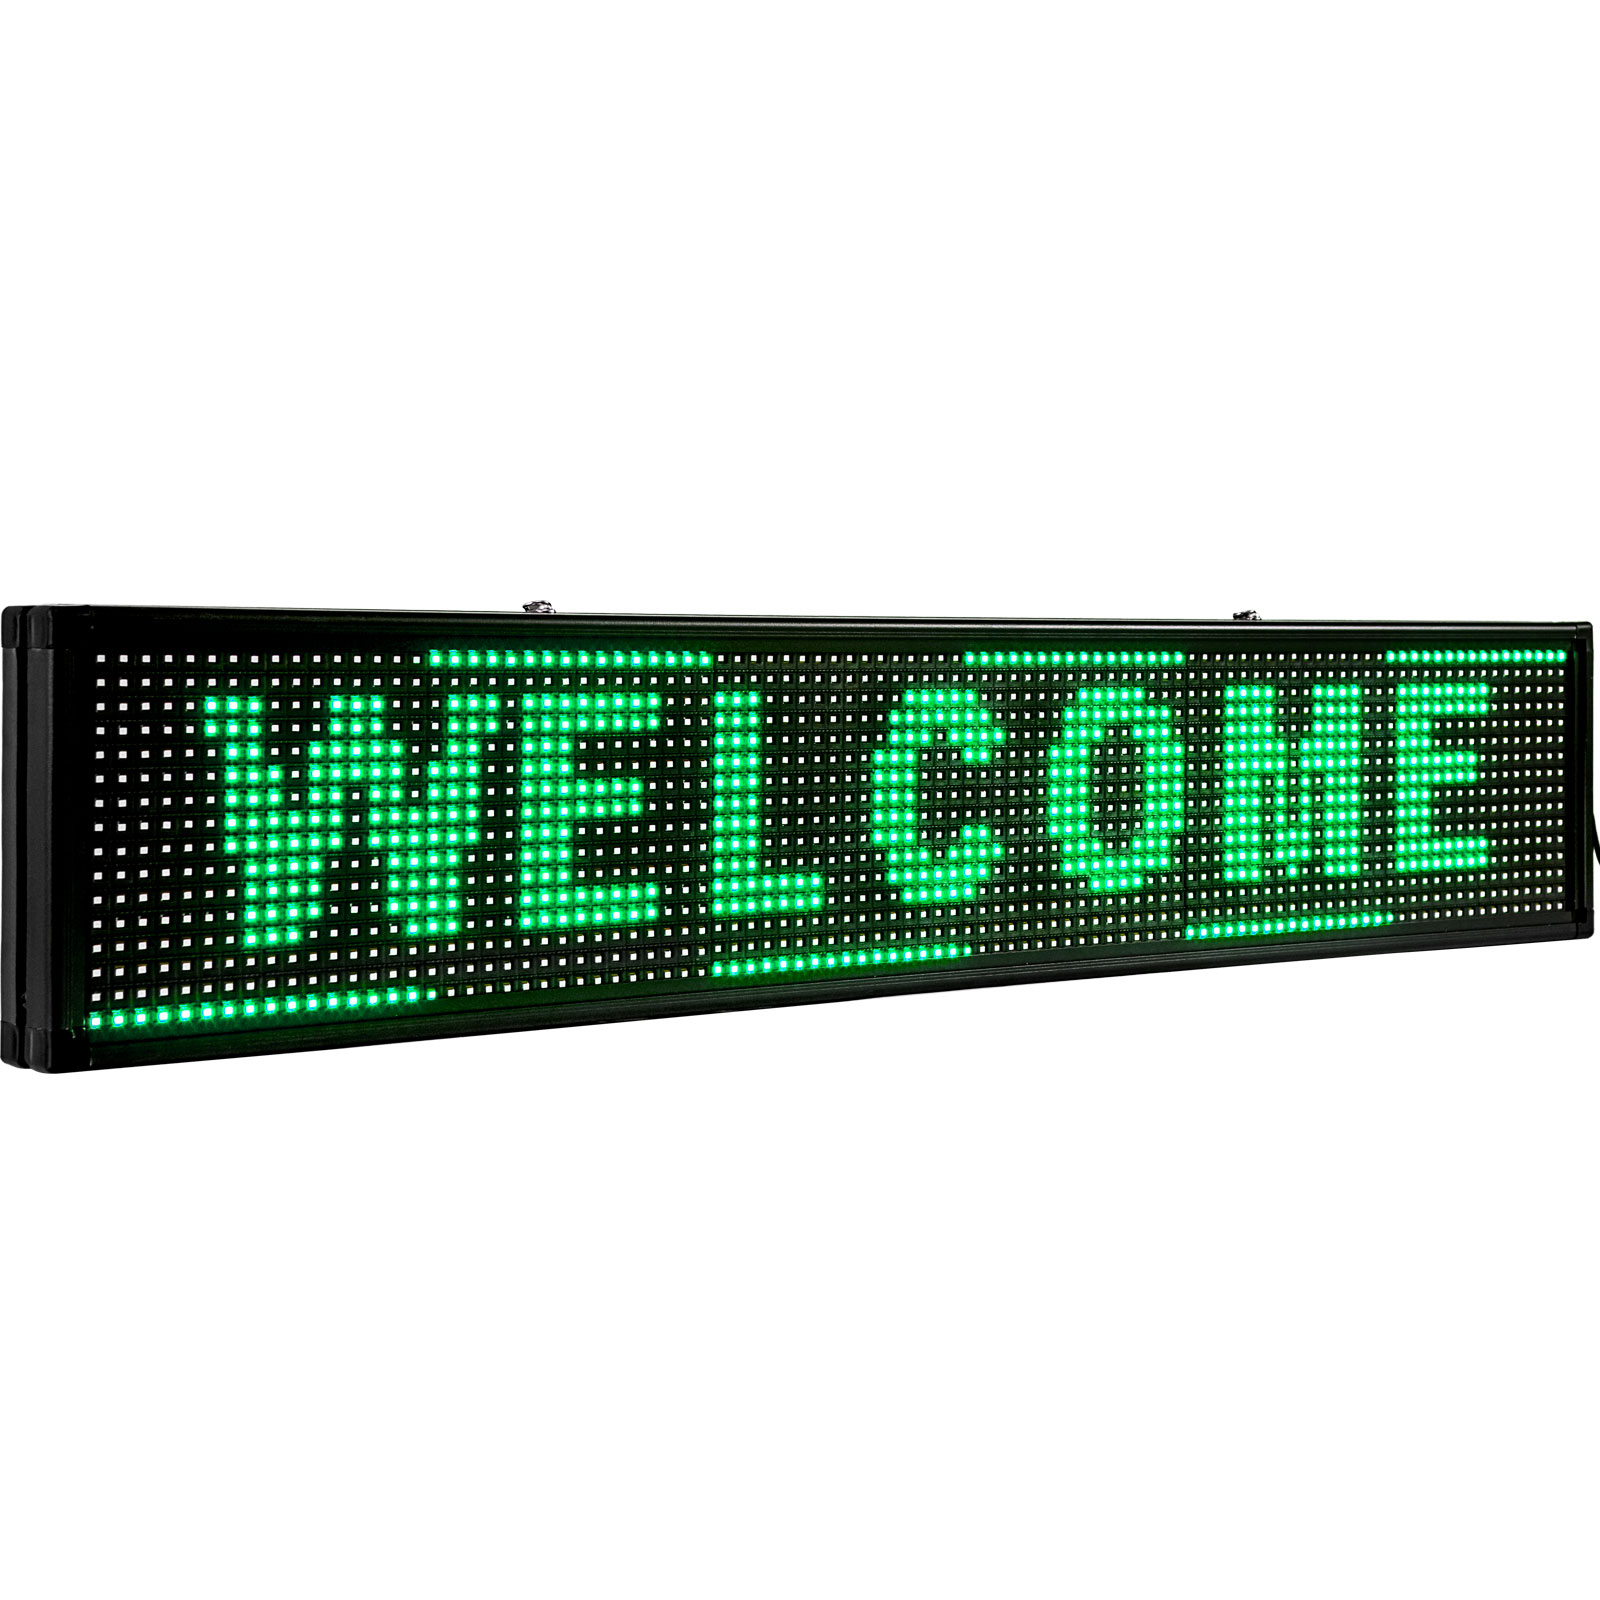 Led Sign Led Scrolling Sign 40 x 8 inch Red Open Signs For Advertising 